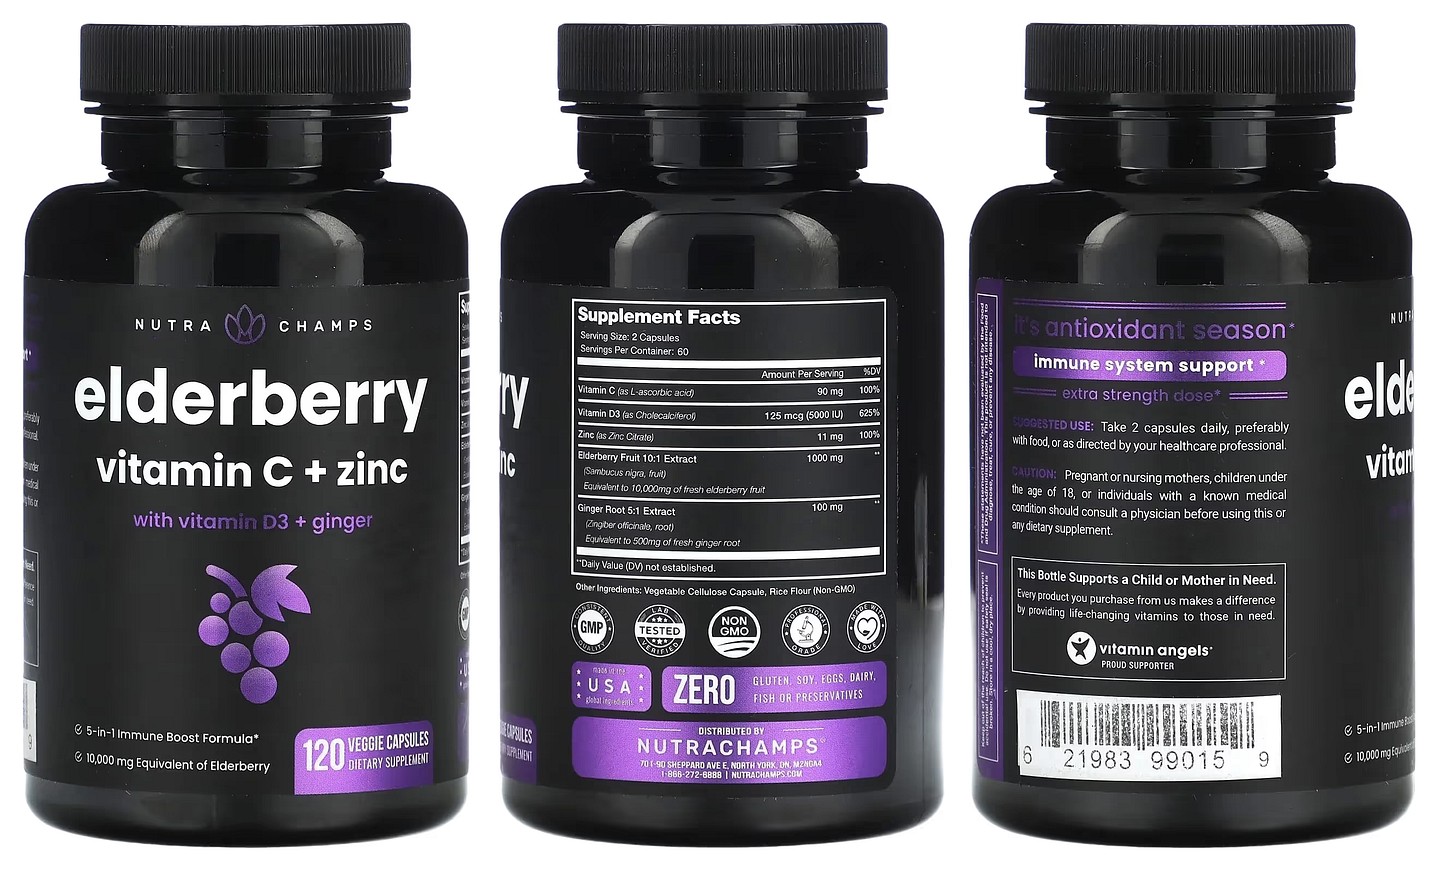 NutraChamps, Elderberry Vitamin C + Zinc with Vitamin D3 + Ginger packaging